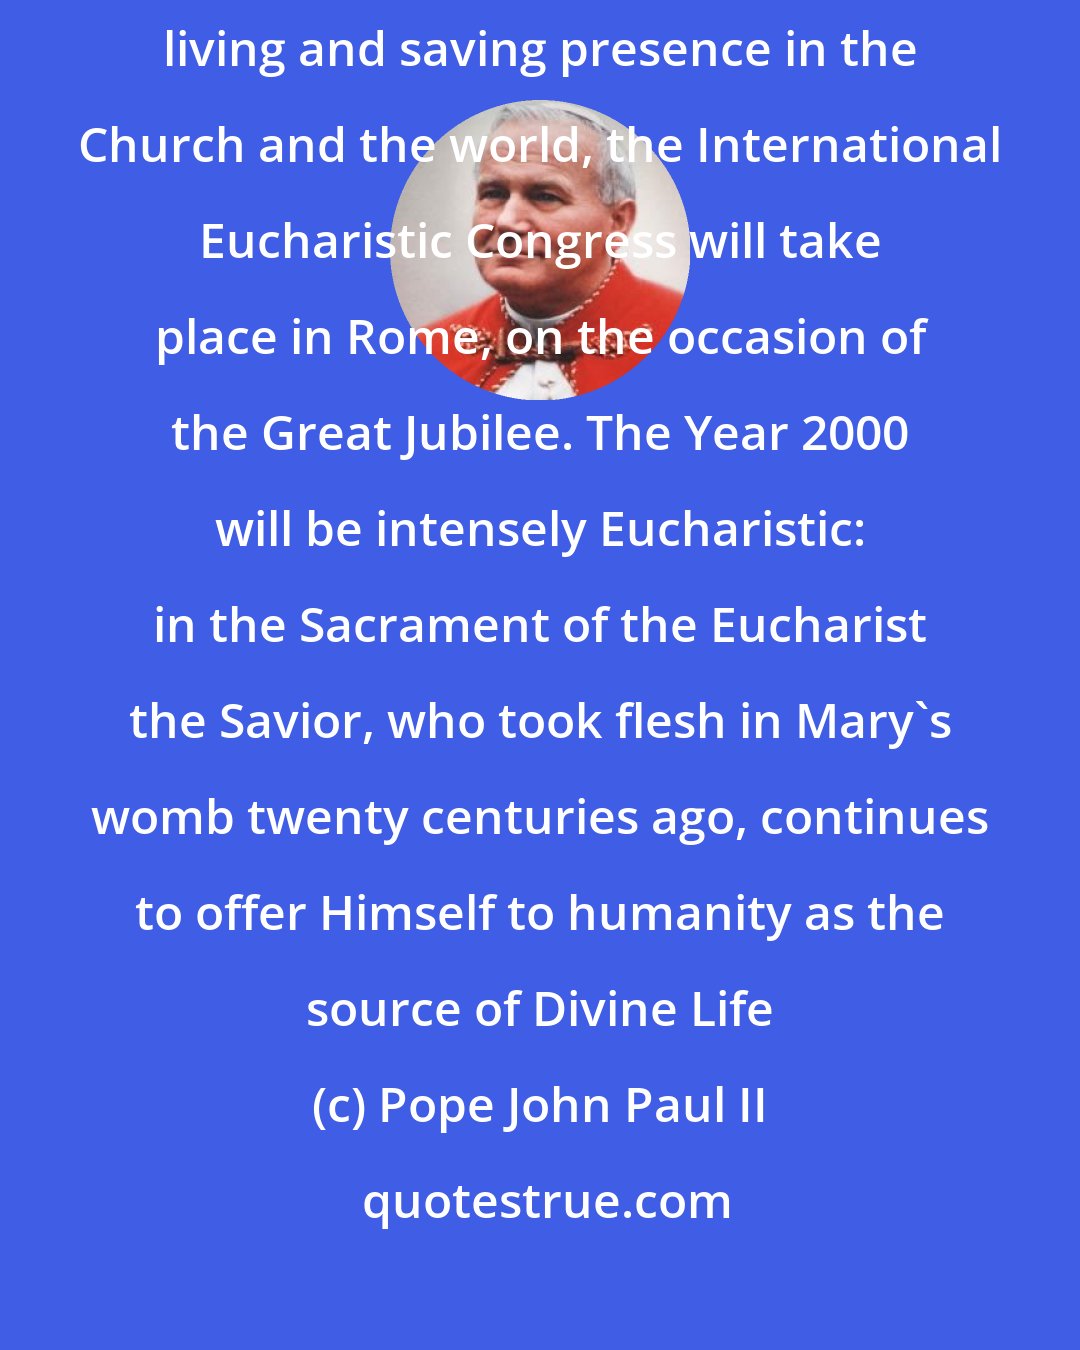 Pope John Paul II: Since Christ is the only way to the Father, in order to highlight His living and saving presence in the Church and the world, the International Eucharistic Congress will take place in Rome, on the occasion of the Great Jubilee. The Year 2000 will be intensely Eucharistic: in the Sacrament of the Eucharist the Savior, who took flesh in Mary's womb twenty centuries ago, continues to offer Himself to humanity as the source of Divine Life